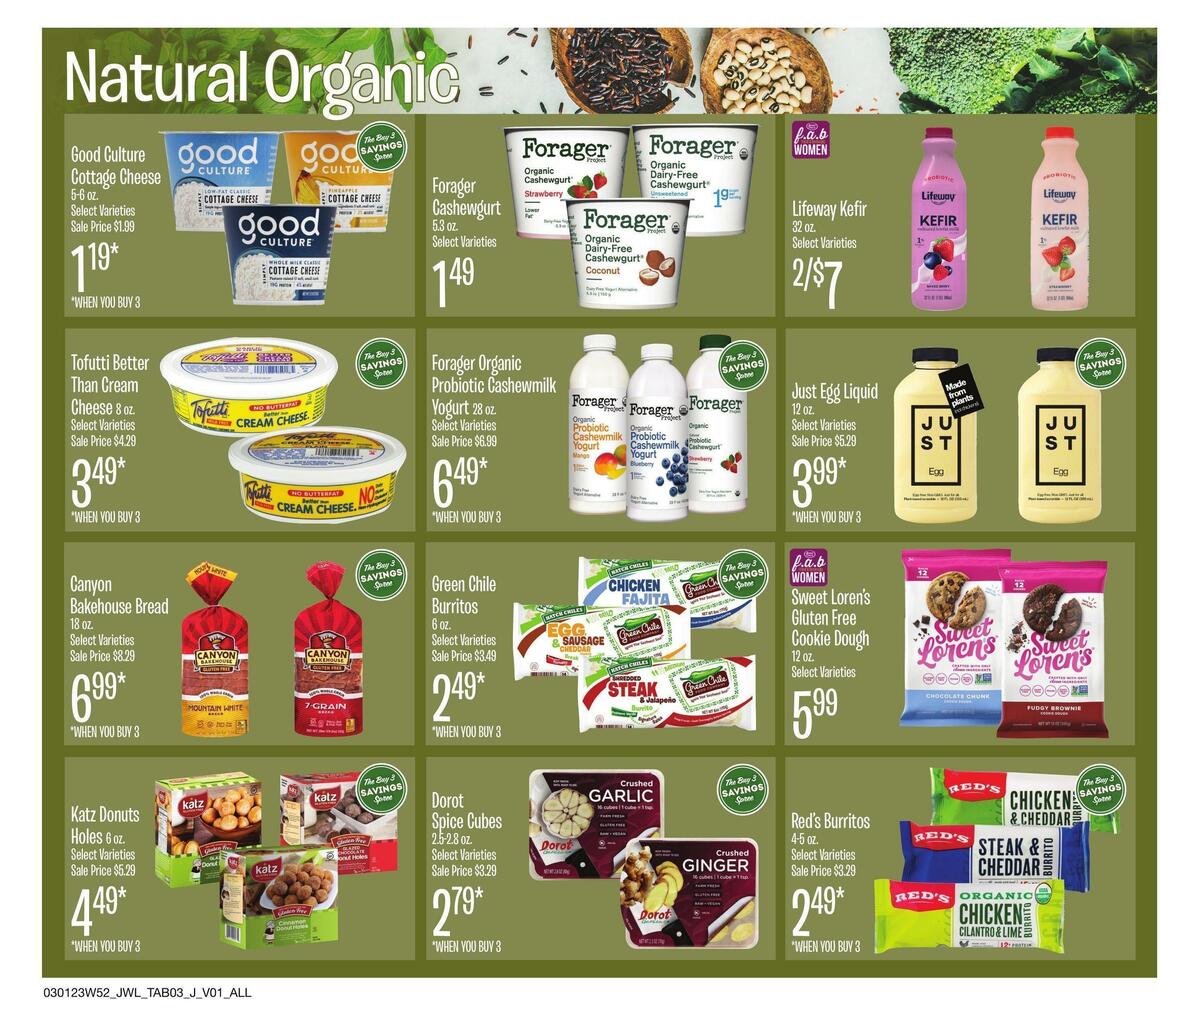 Jewel Osco Natural & Organic Weekly Ad from March 1